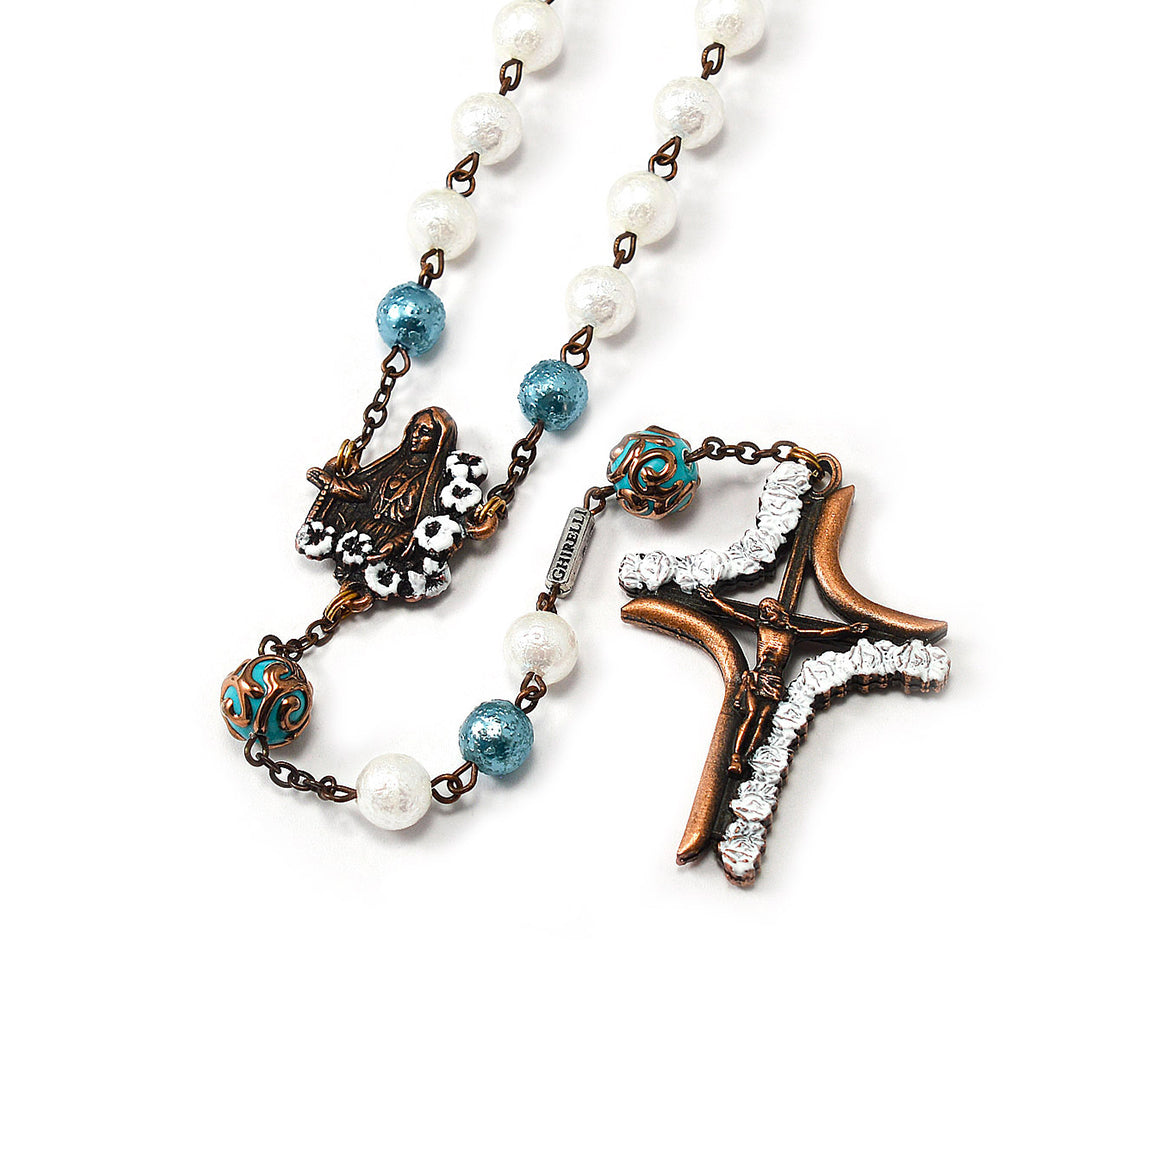 Our Lady of Fatima Rosary with Lumen Glass Beads